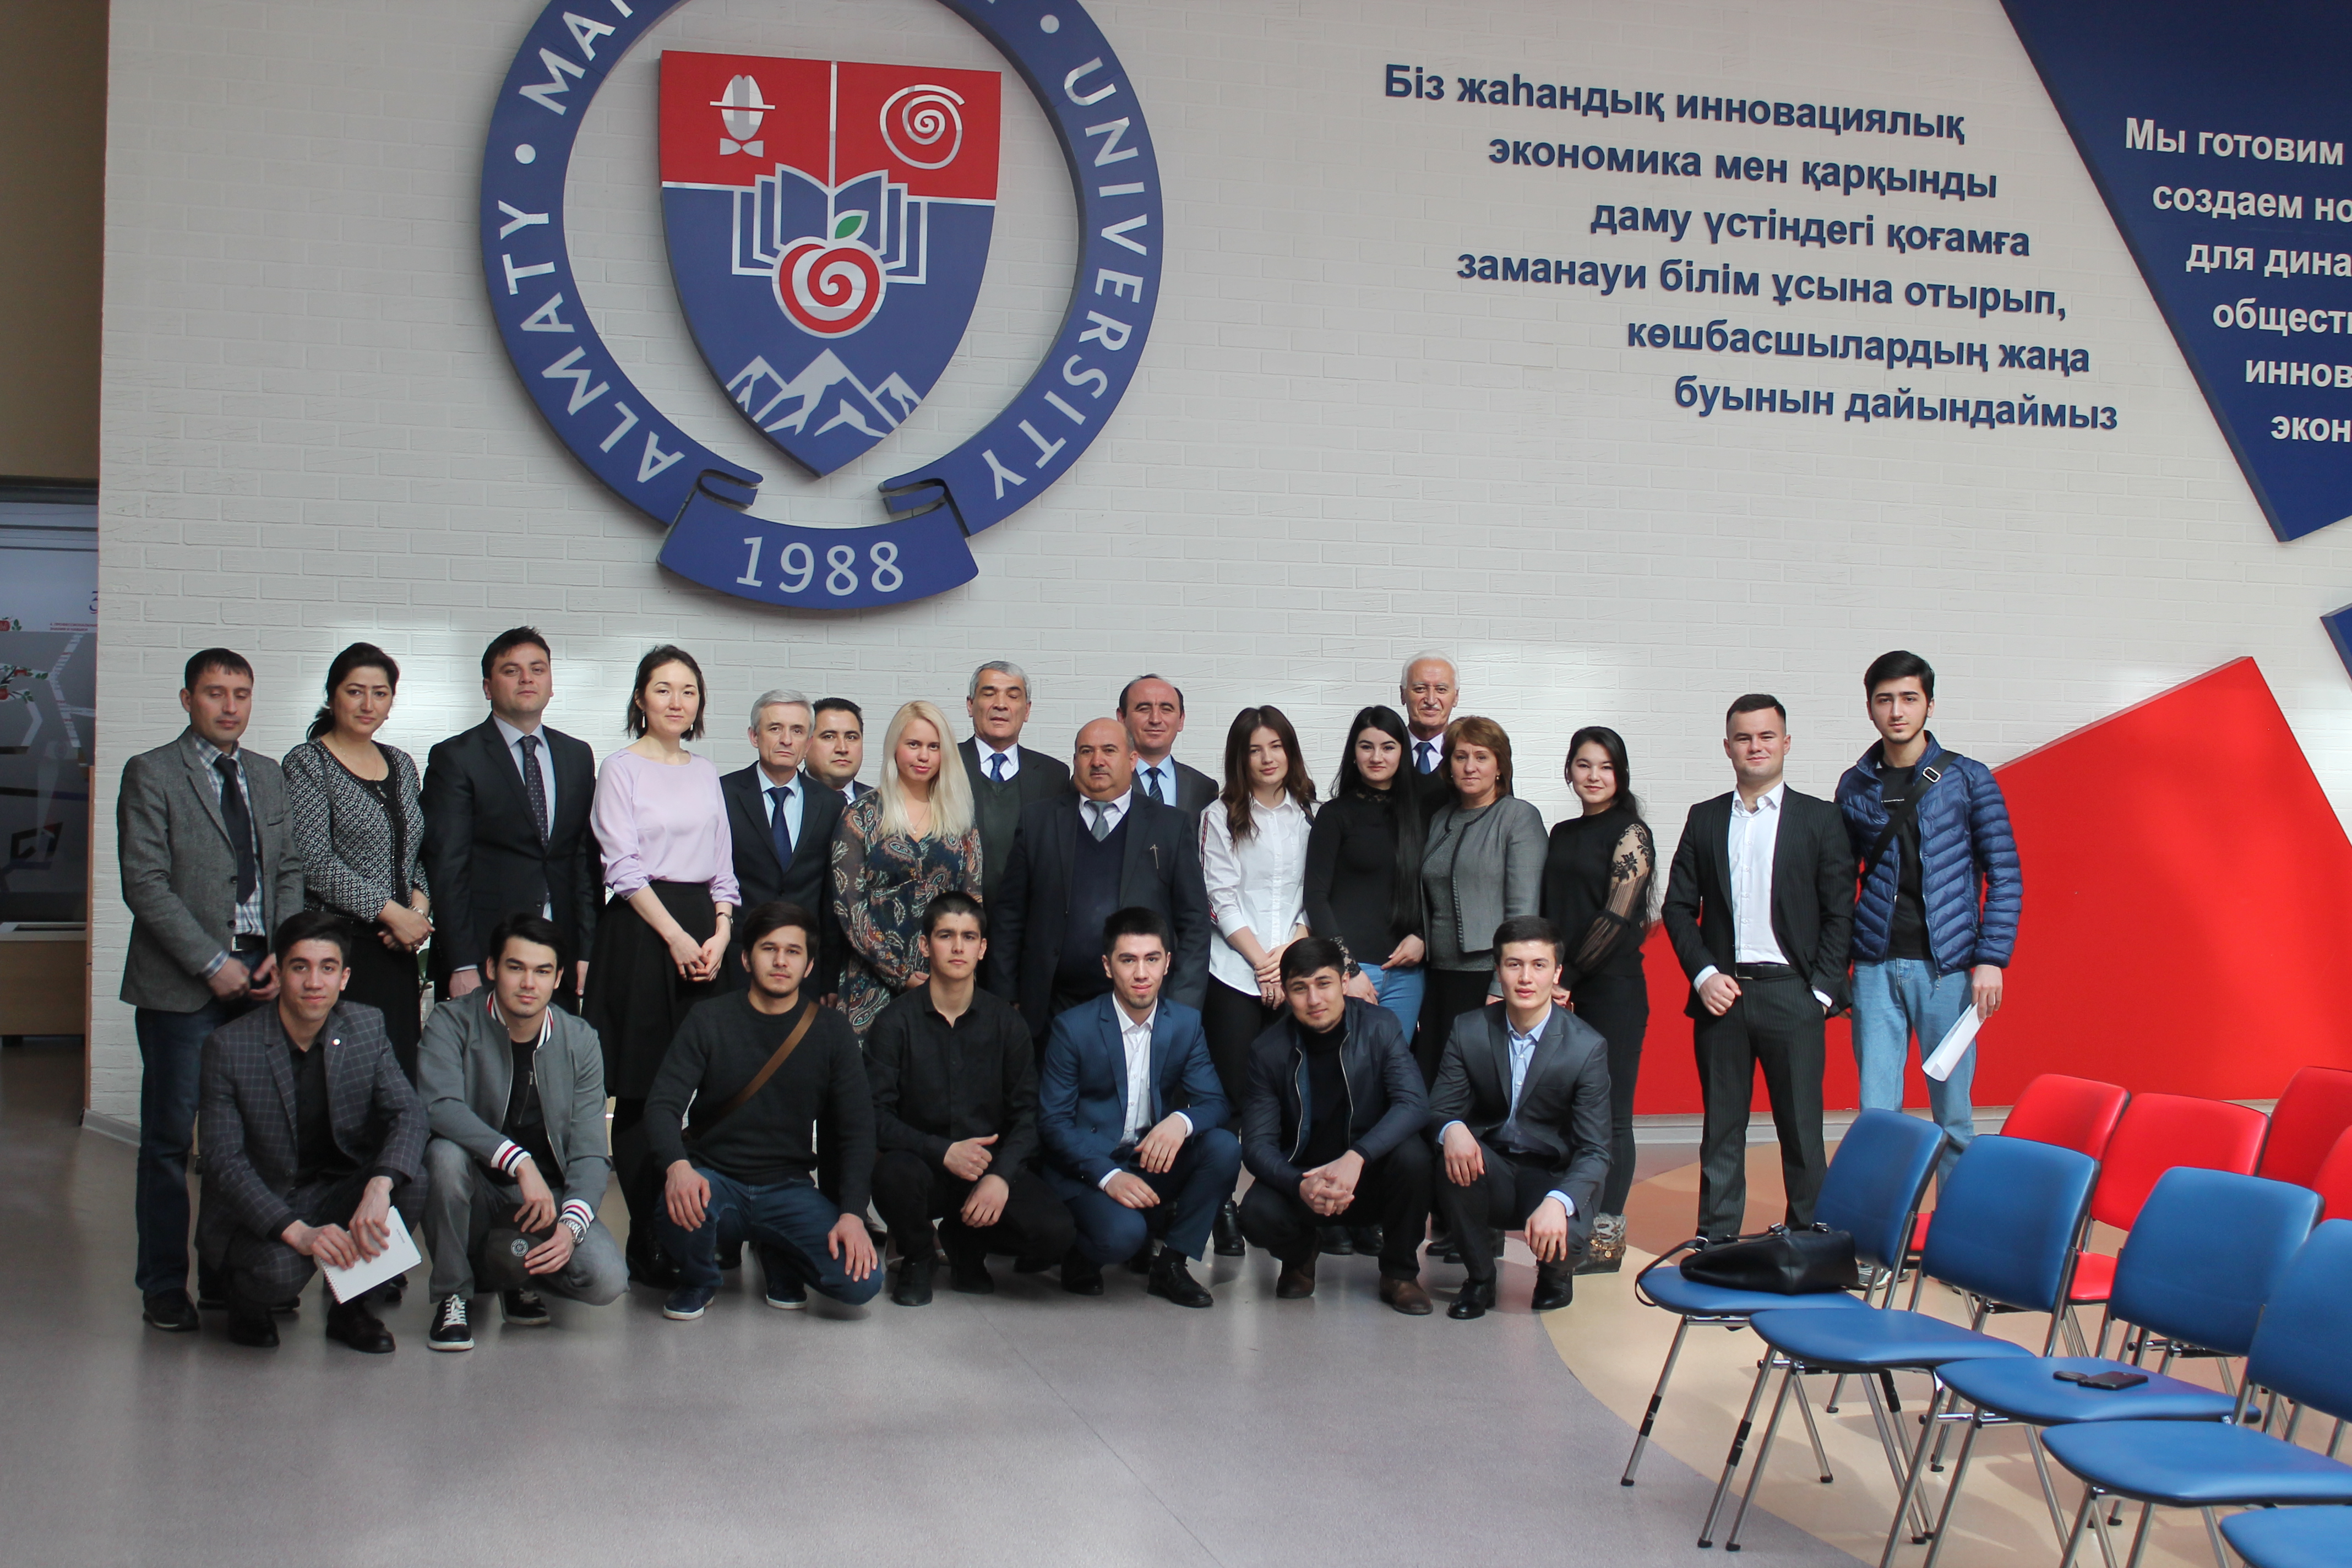 AlmaU's project on the quality management system from the World Bank in partnership with a university in Tajikistan has been successfully completed.